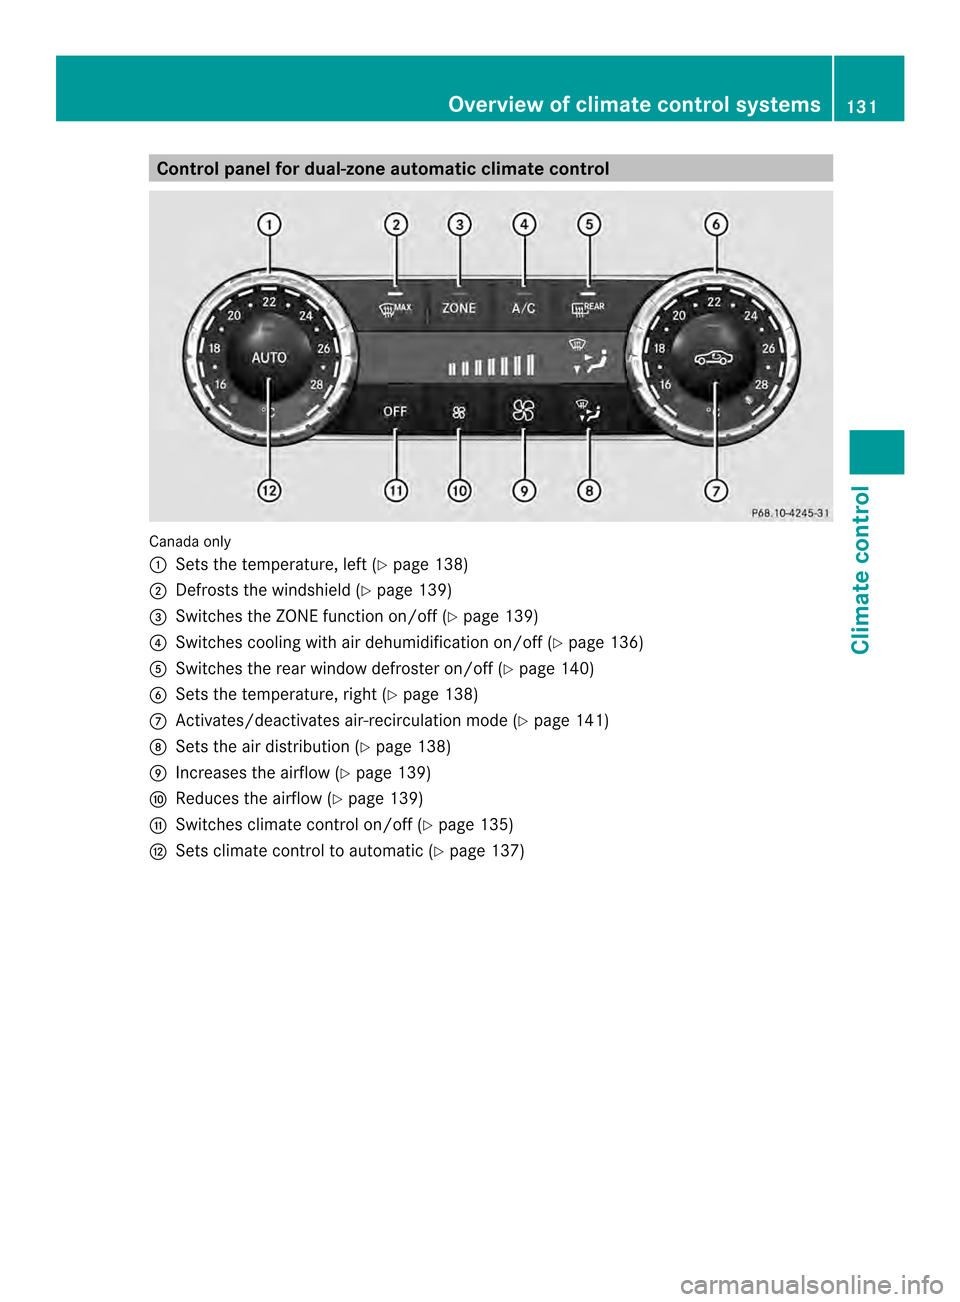 MERCEDES-BENZ CLS-Class 2014 W218 Owners Manual Control panel for dual-zone automatic climat
econtrol Canad
aonly
001A Setsthe temperature, left (Y page 138)
0010 Defrost sthe windshield (Y page 139)
0024 Switches th eZONE function on/of f(Y page 1